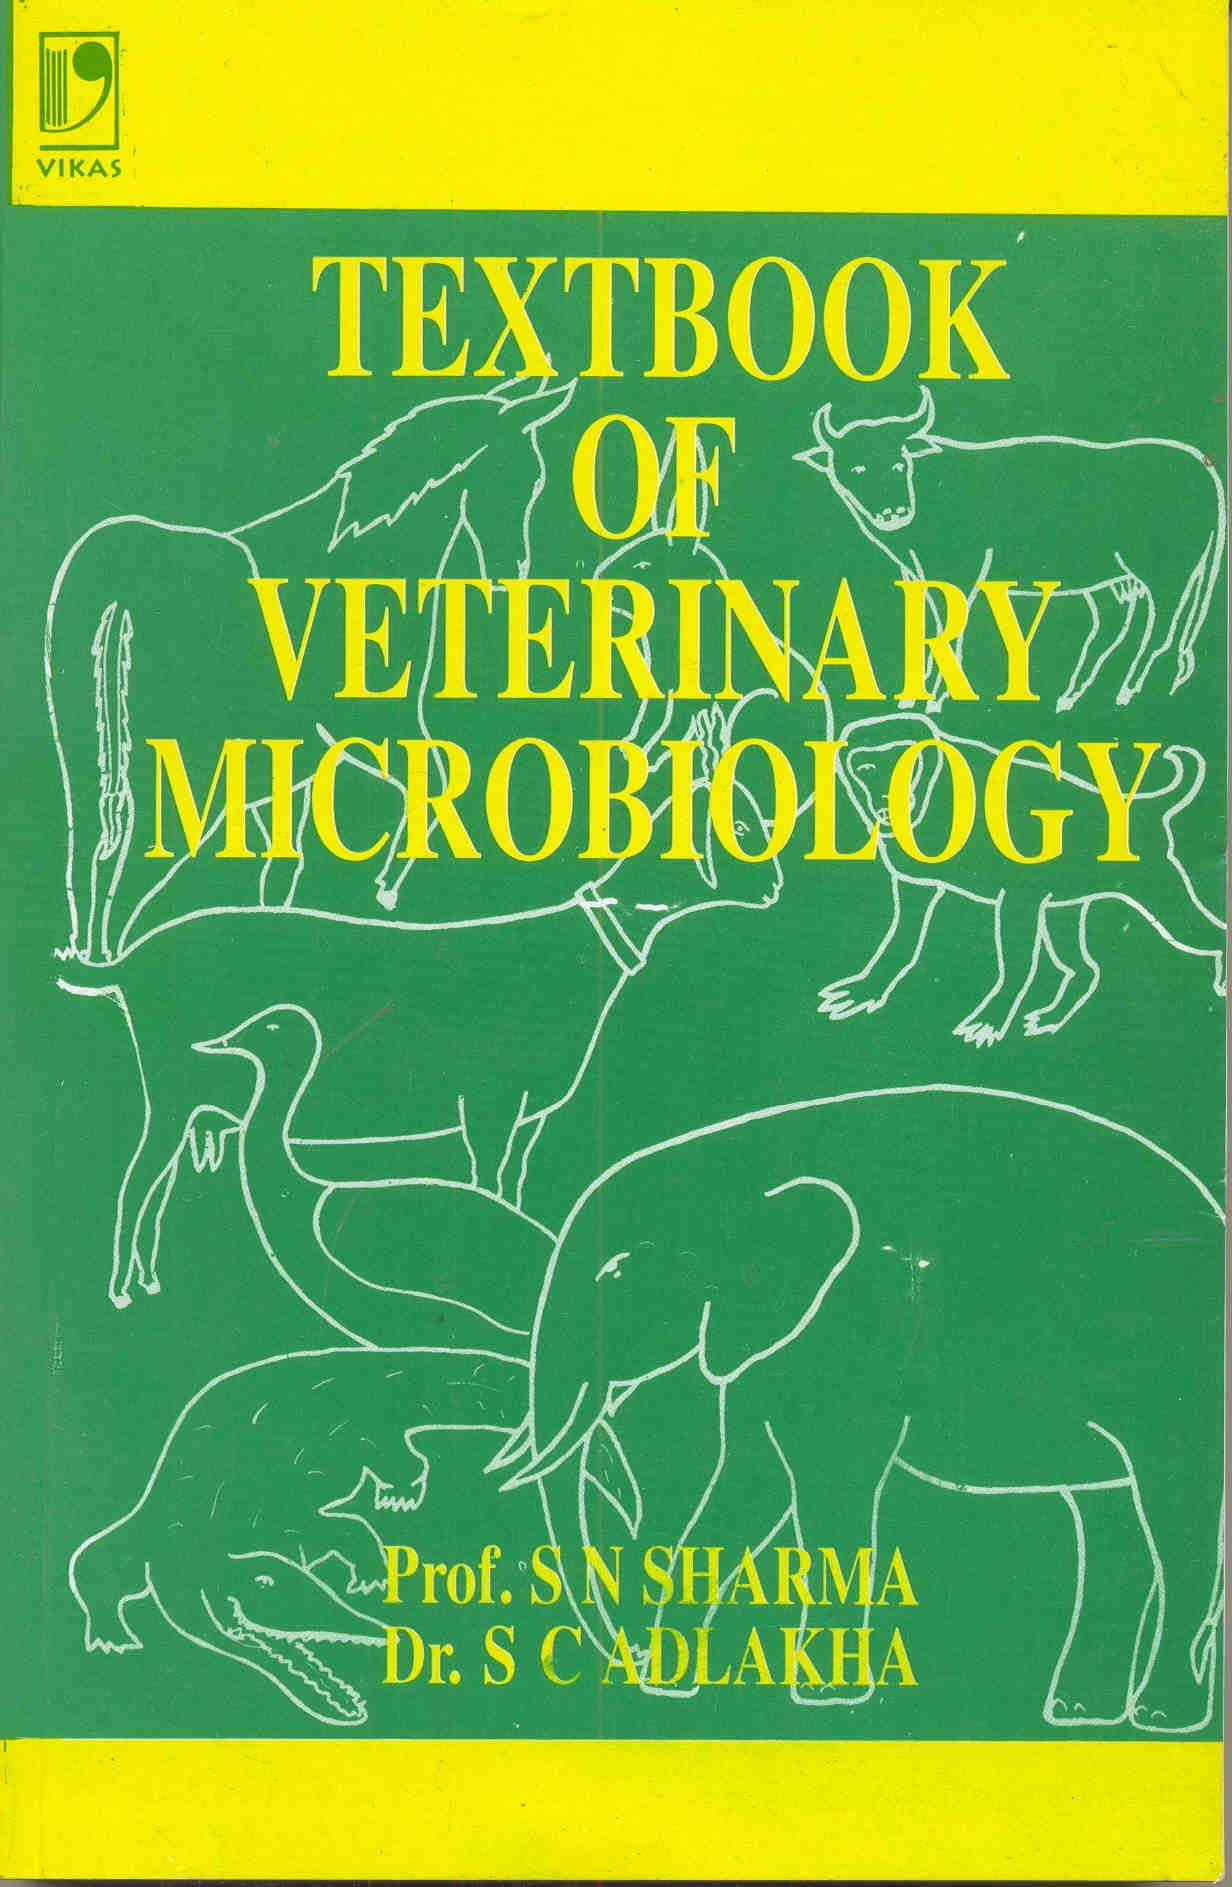 List of Recommended Books in Veterinary Sciences